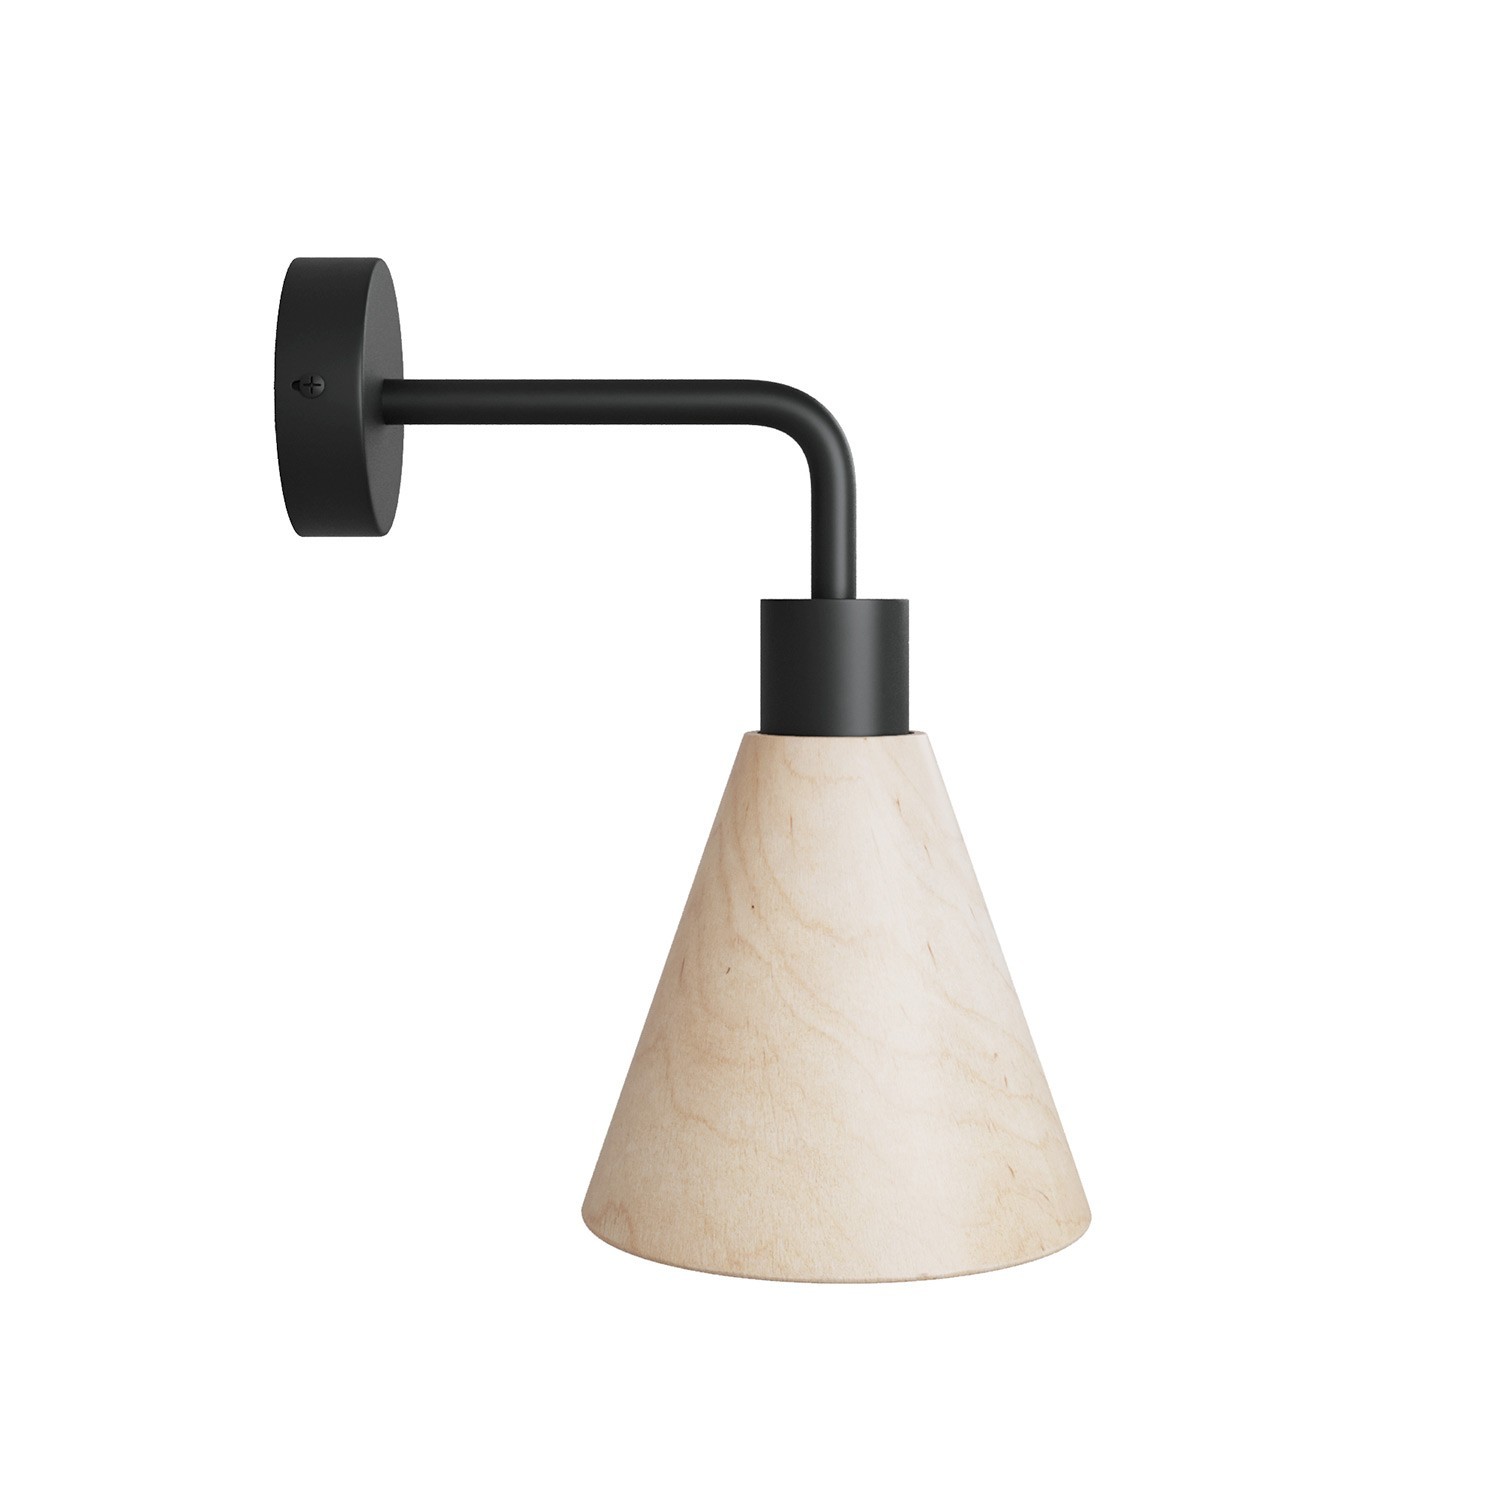 Fermaluce lamp with wooden conical lampshade and curved extension